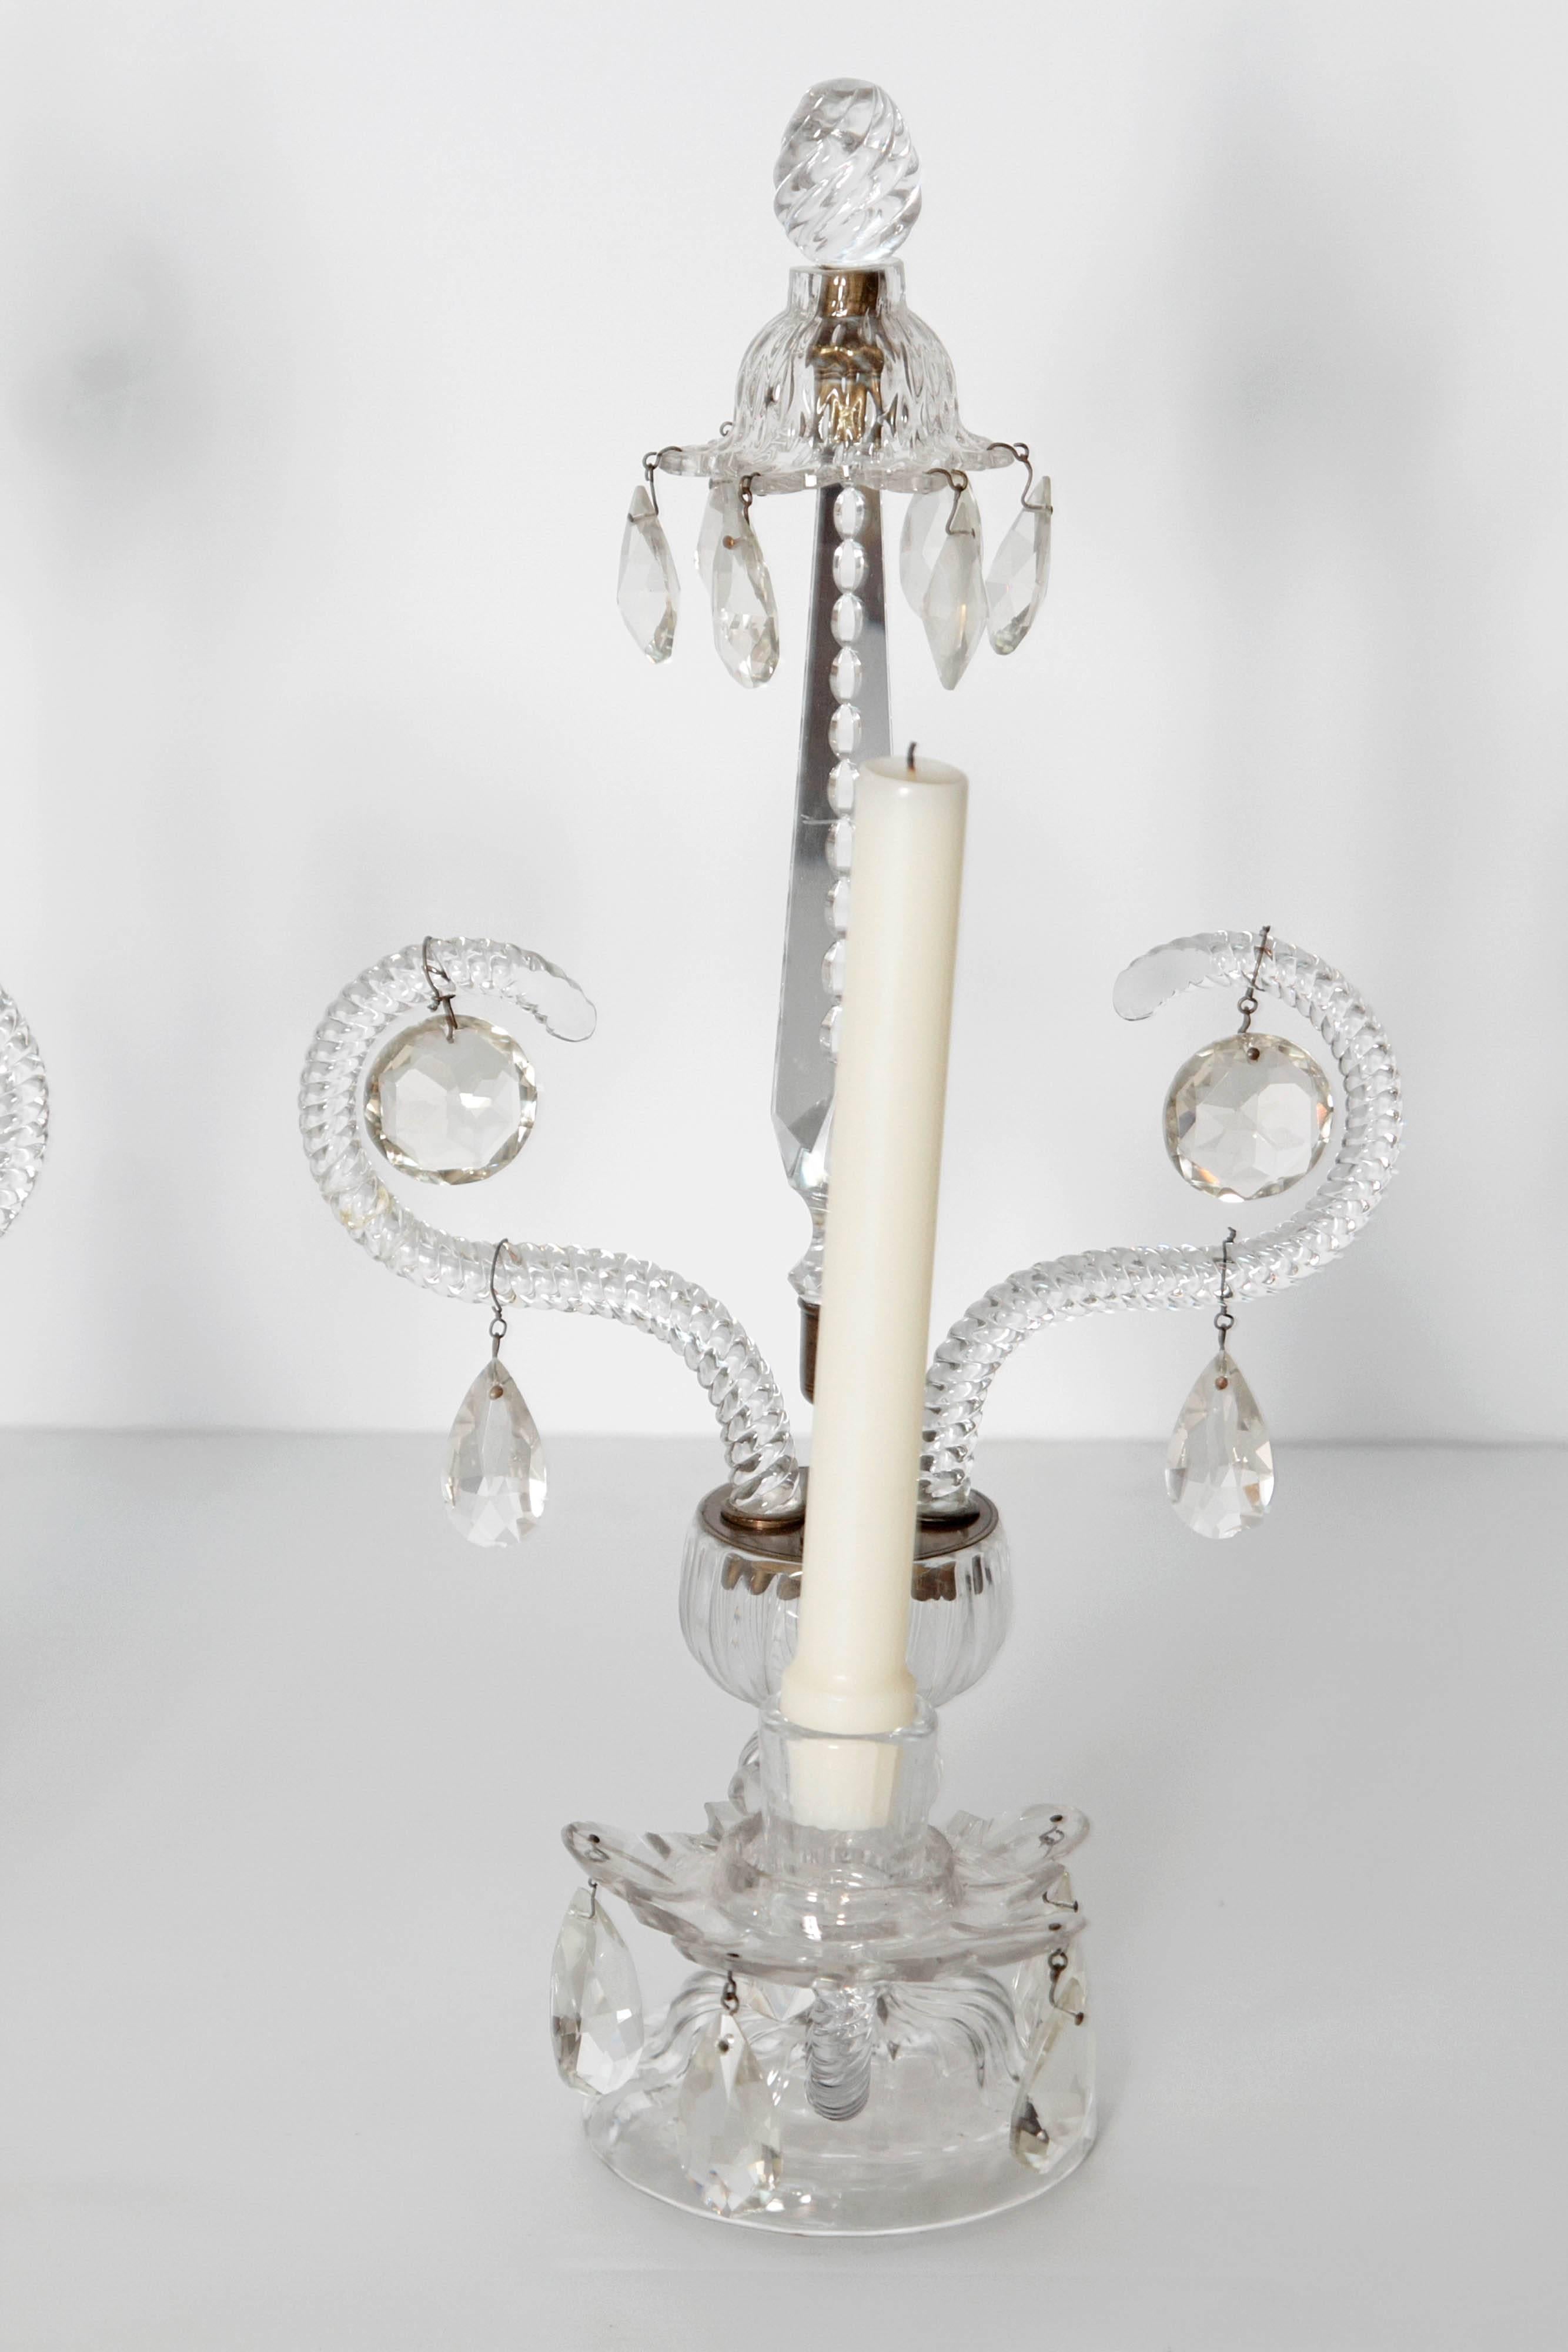 pair of Georgian / period George II cut-glass girandoles / lustres composed of a round base with two scrolling arms with suspended prisms, a central finial topped by a 